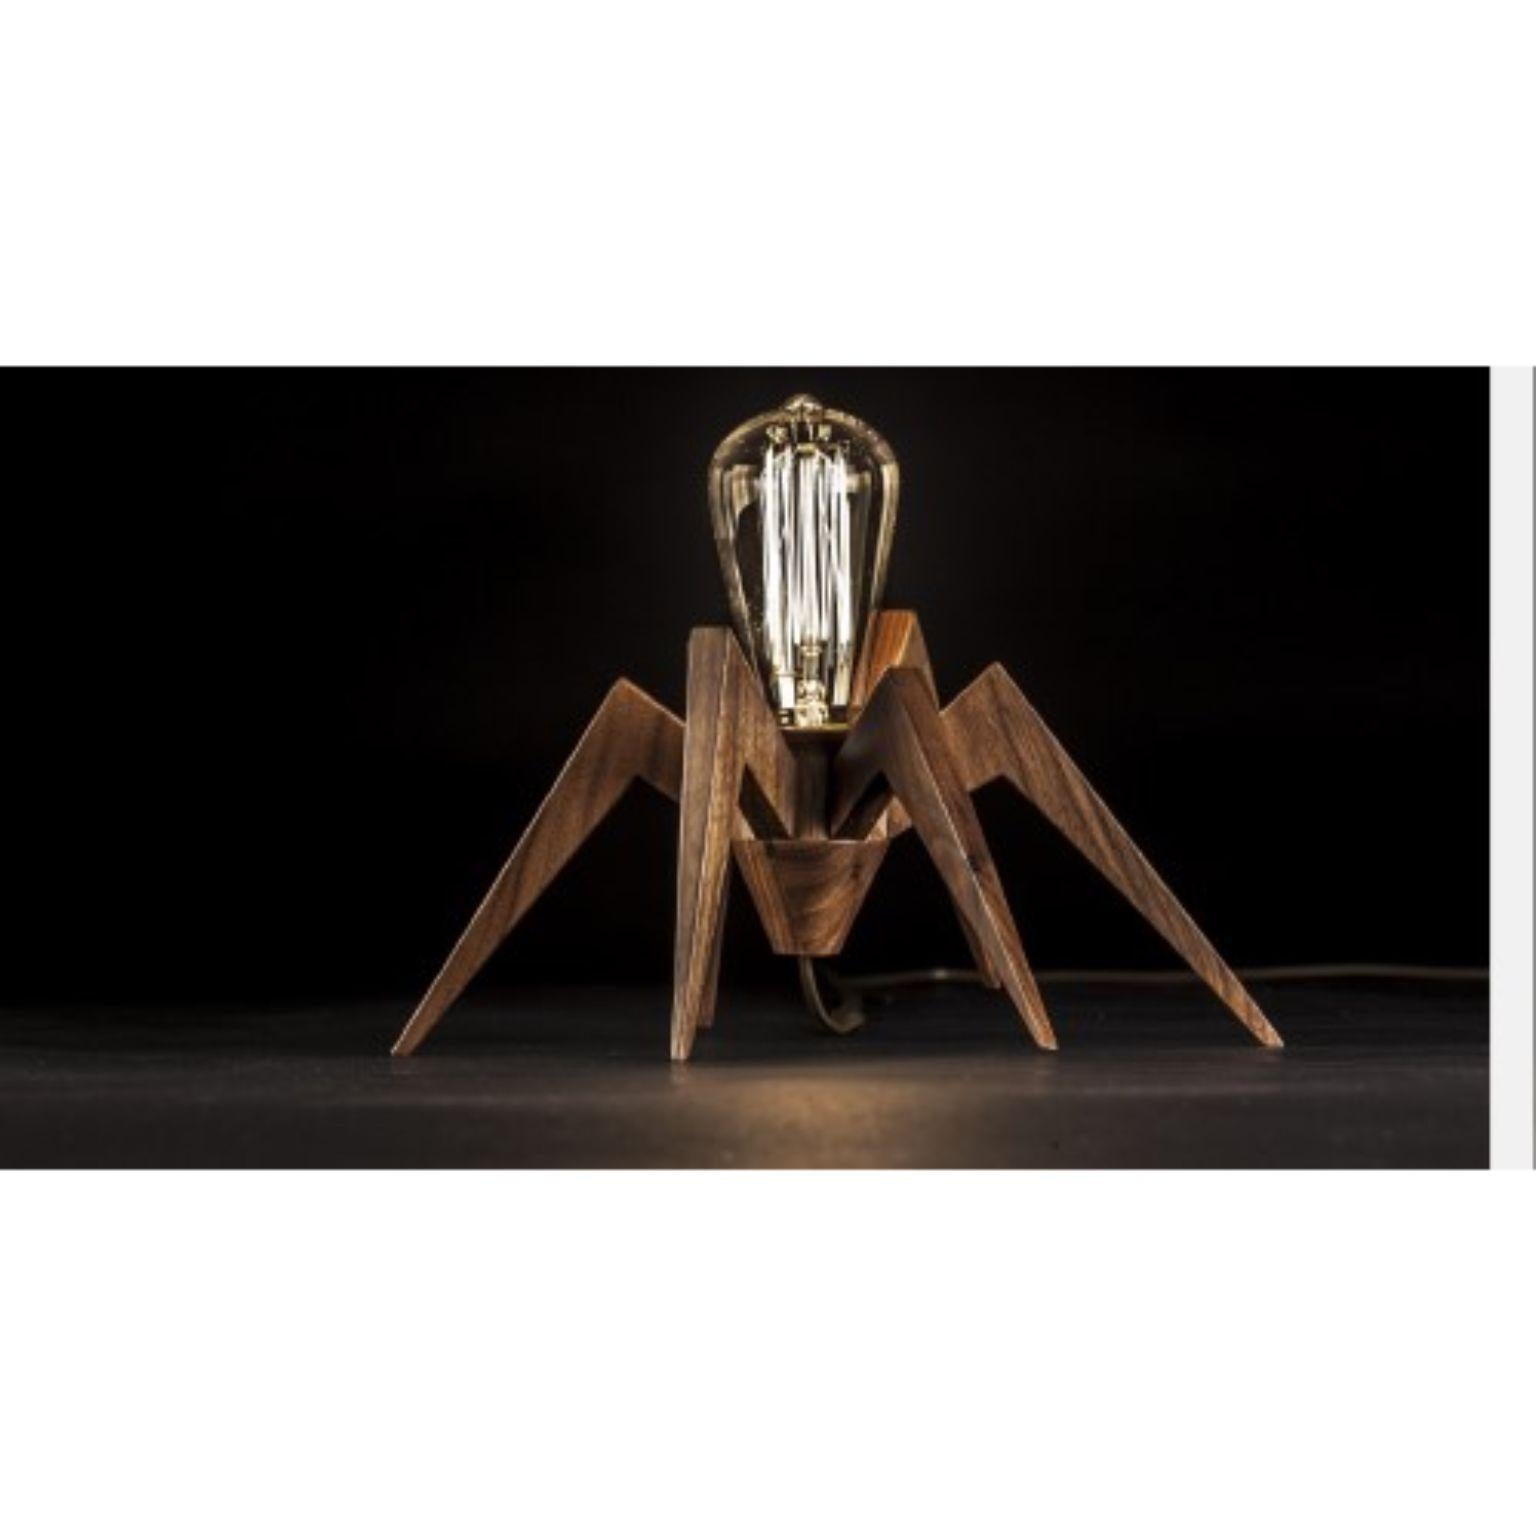 Spider lamp by Alexandre Caldas
Dimensions: W 30 x D 23 x H 14 cm
Materials: Solid walnut wood

Materials Available in ash, beech, walnut

Spider lamp is a decorative light in solid wood, with the capacity to be used according to the